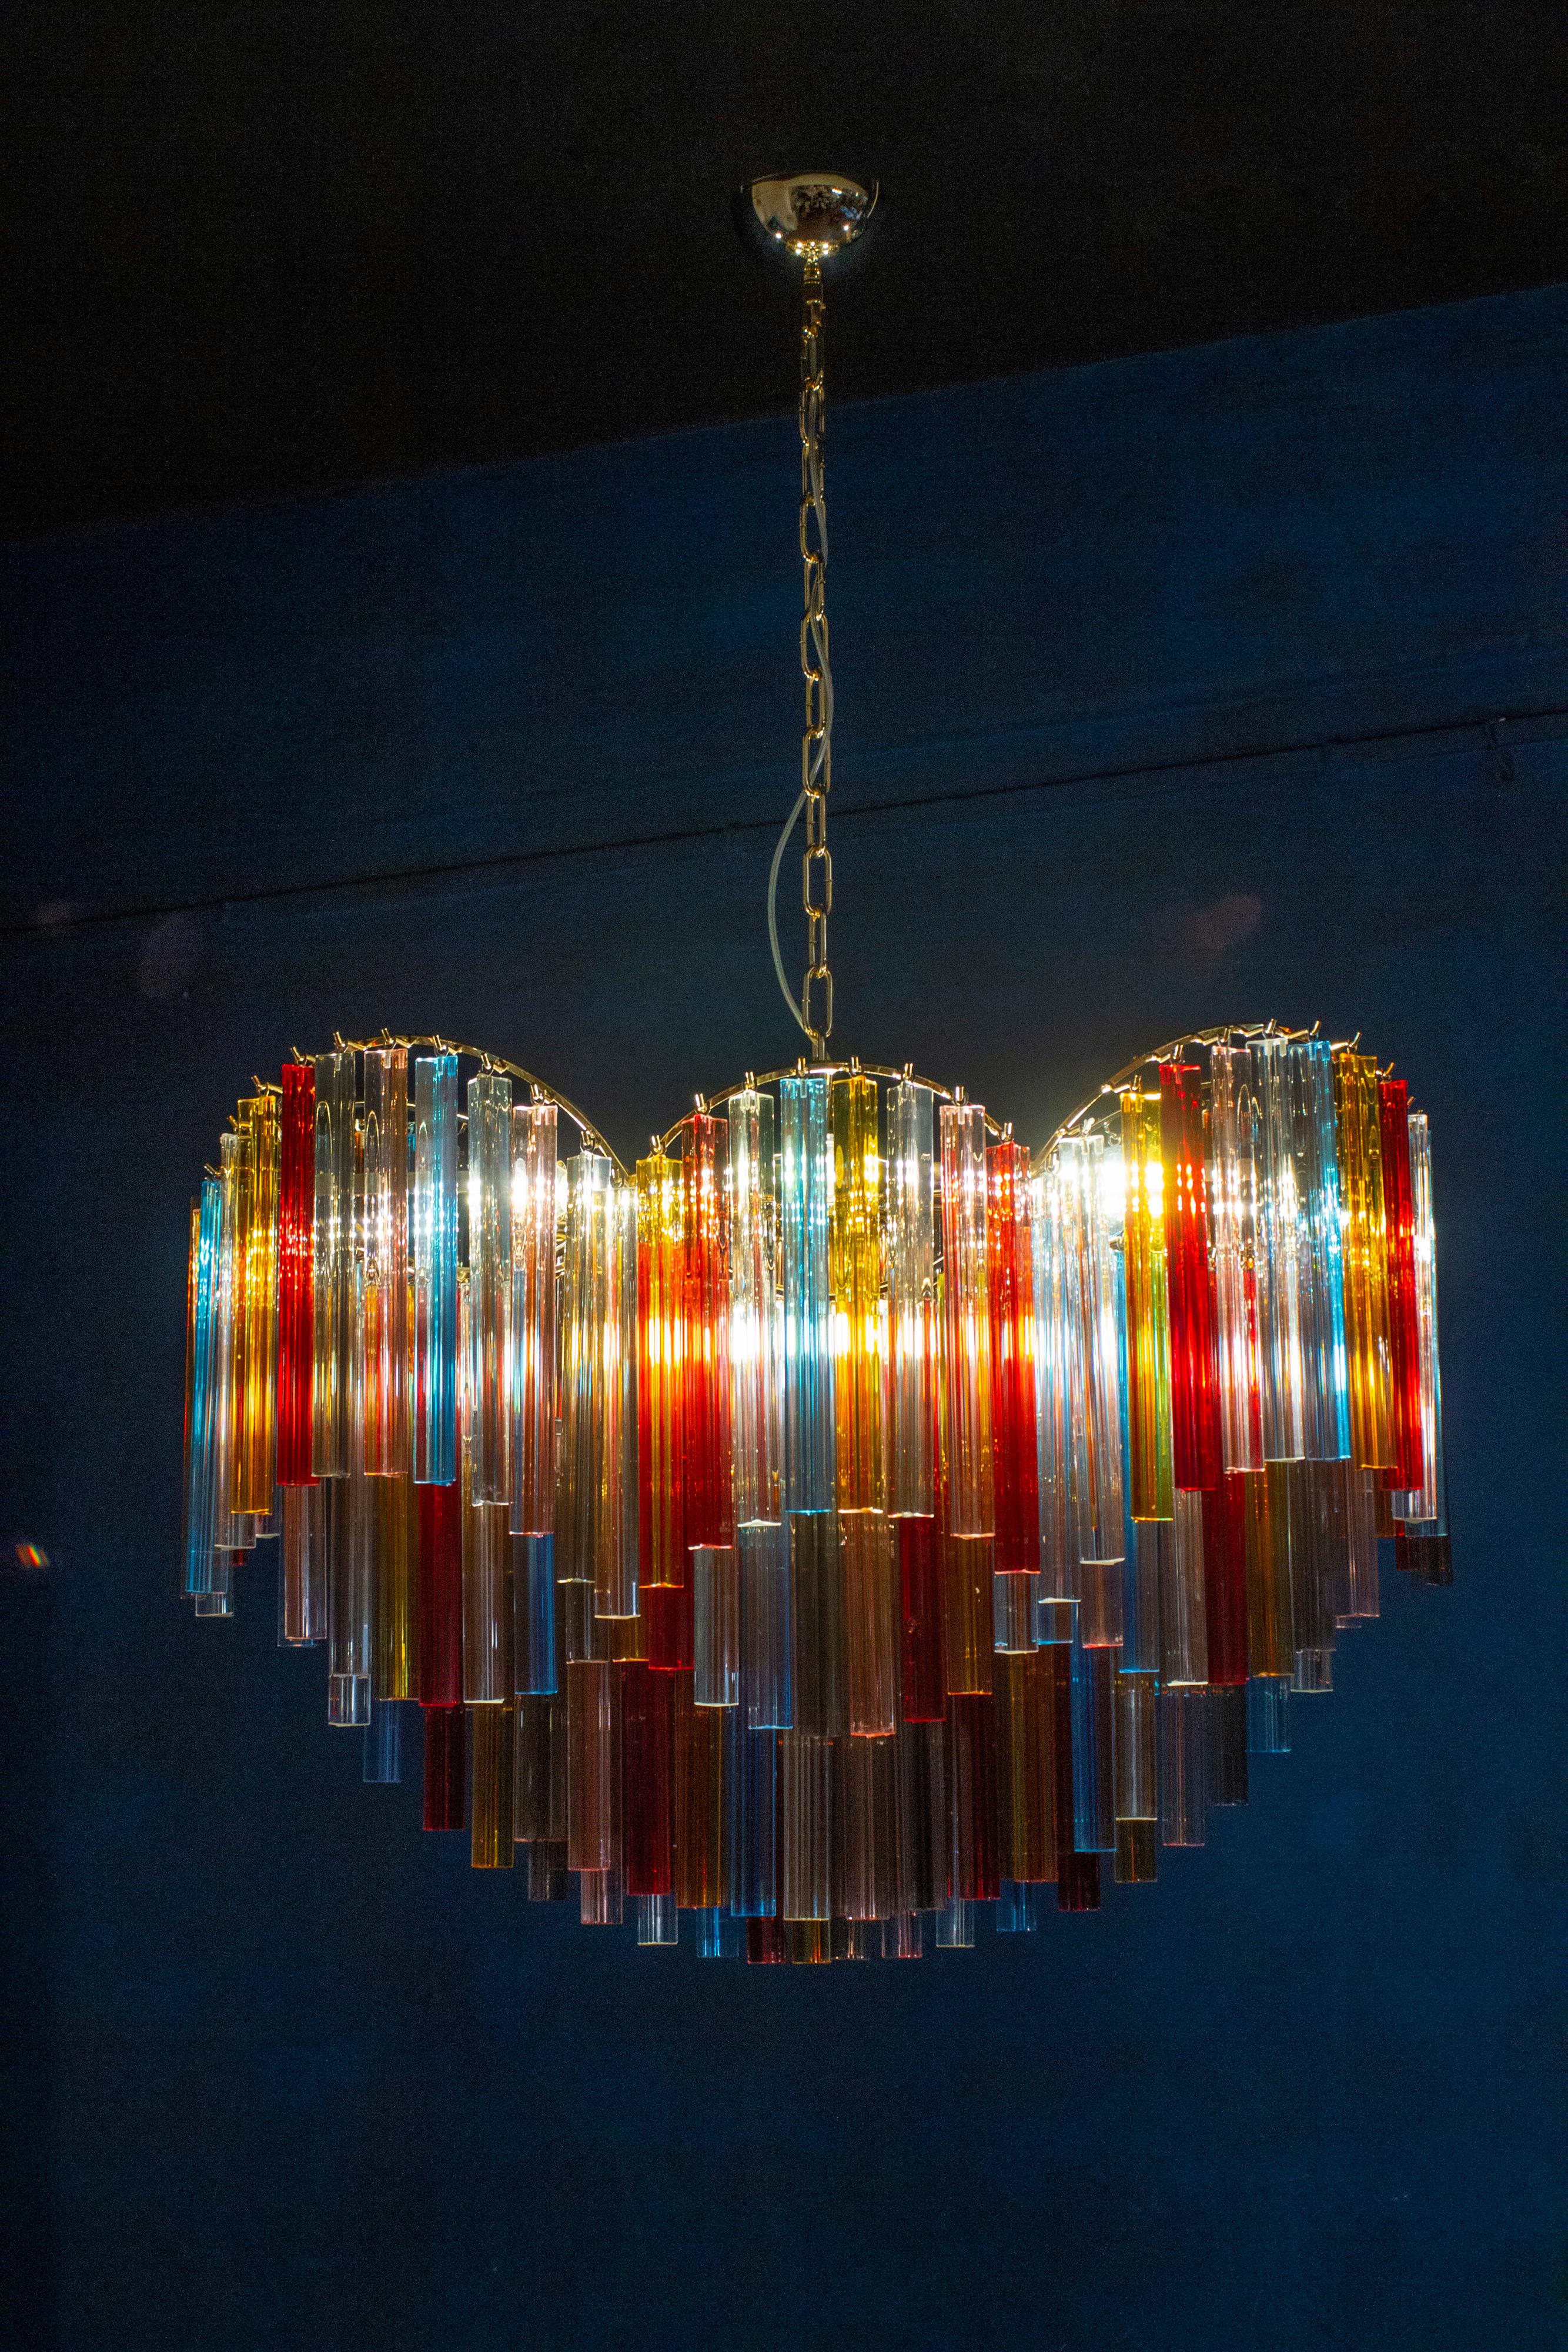 Outstanding Murano chandelier made by Murano crystal multicolored triedi prism on four levels with a gold metal frame.
The glasses are Aquamarine, transparent, blue, smoky, purple, yellow, pink and orange , creating a fabulous light